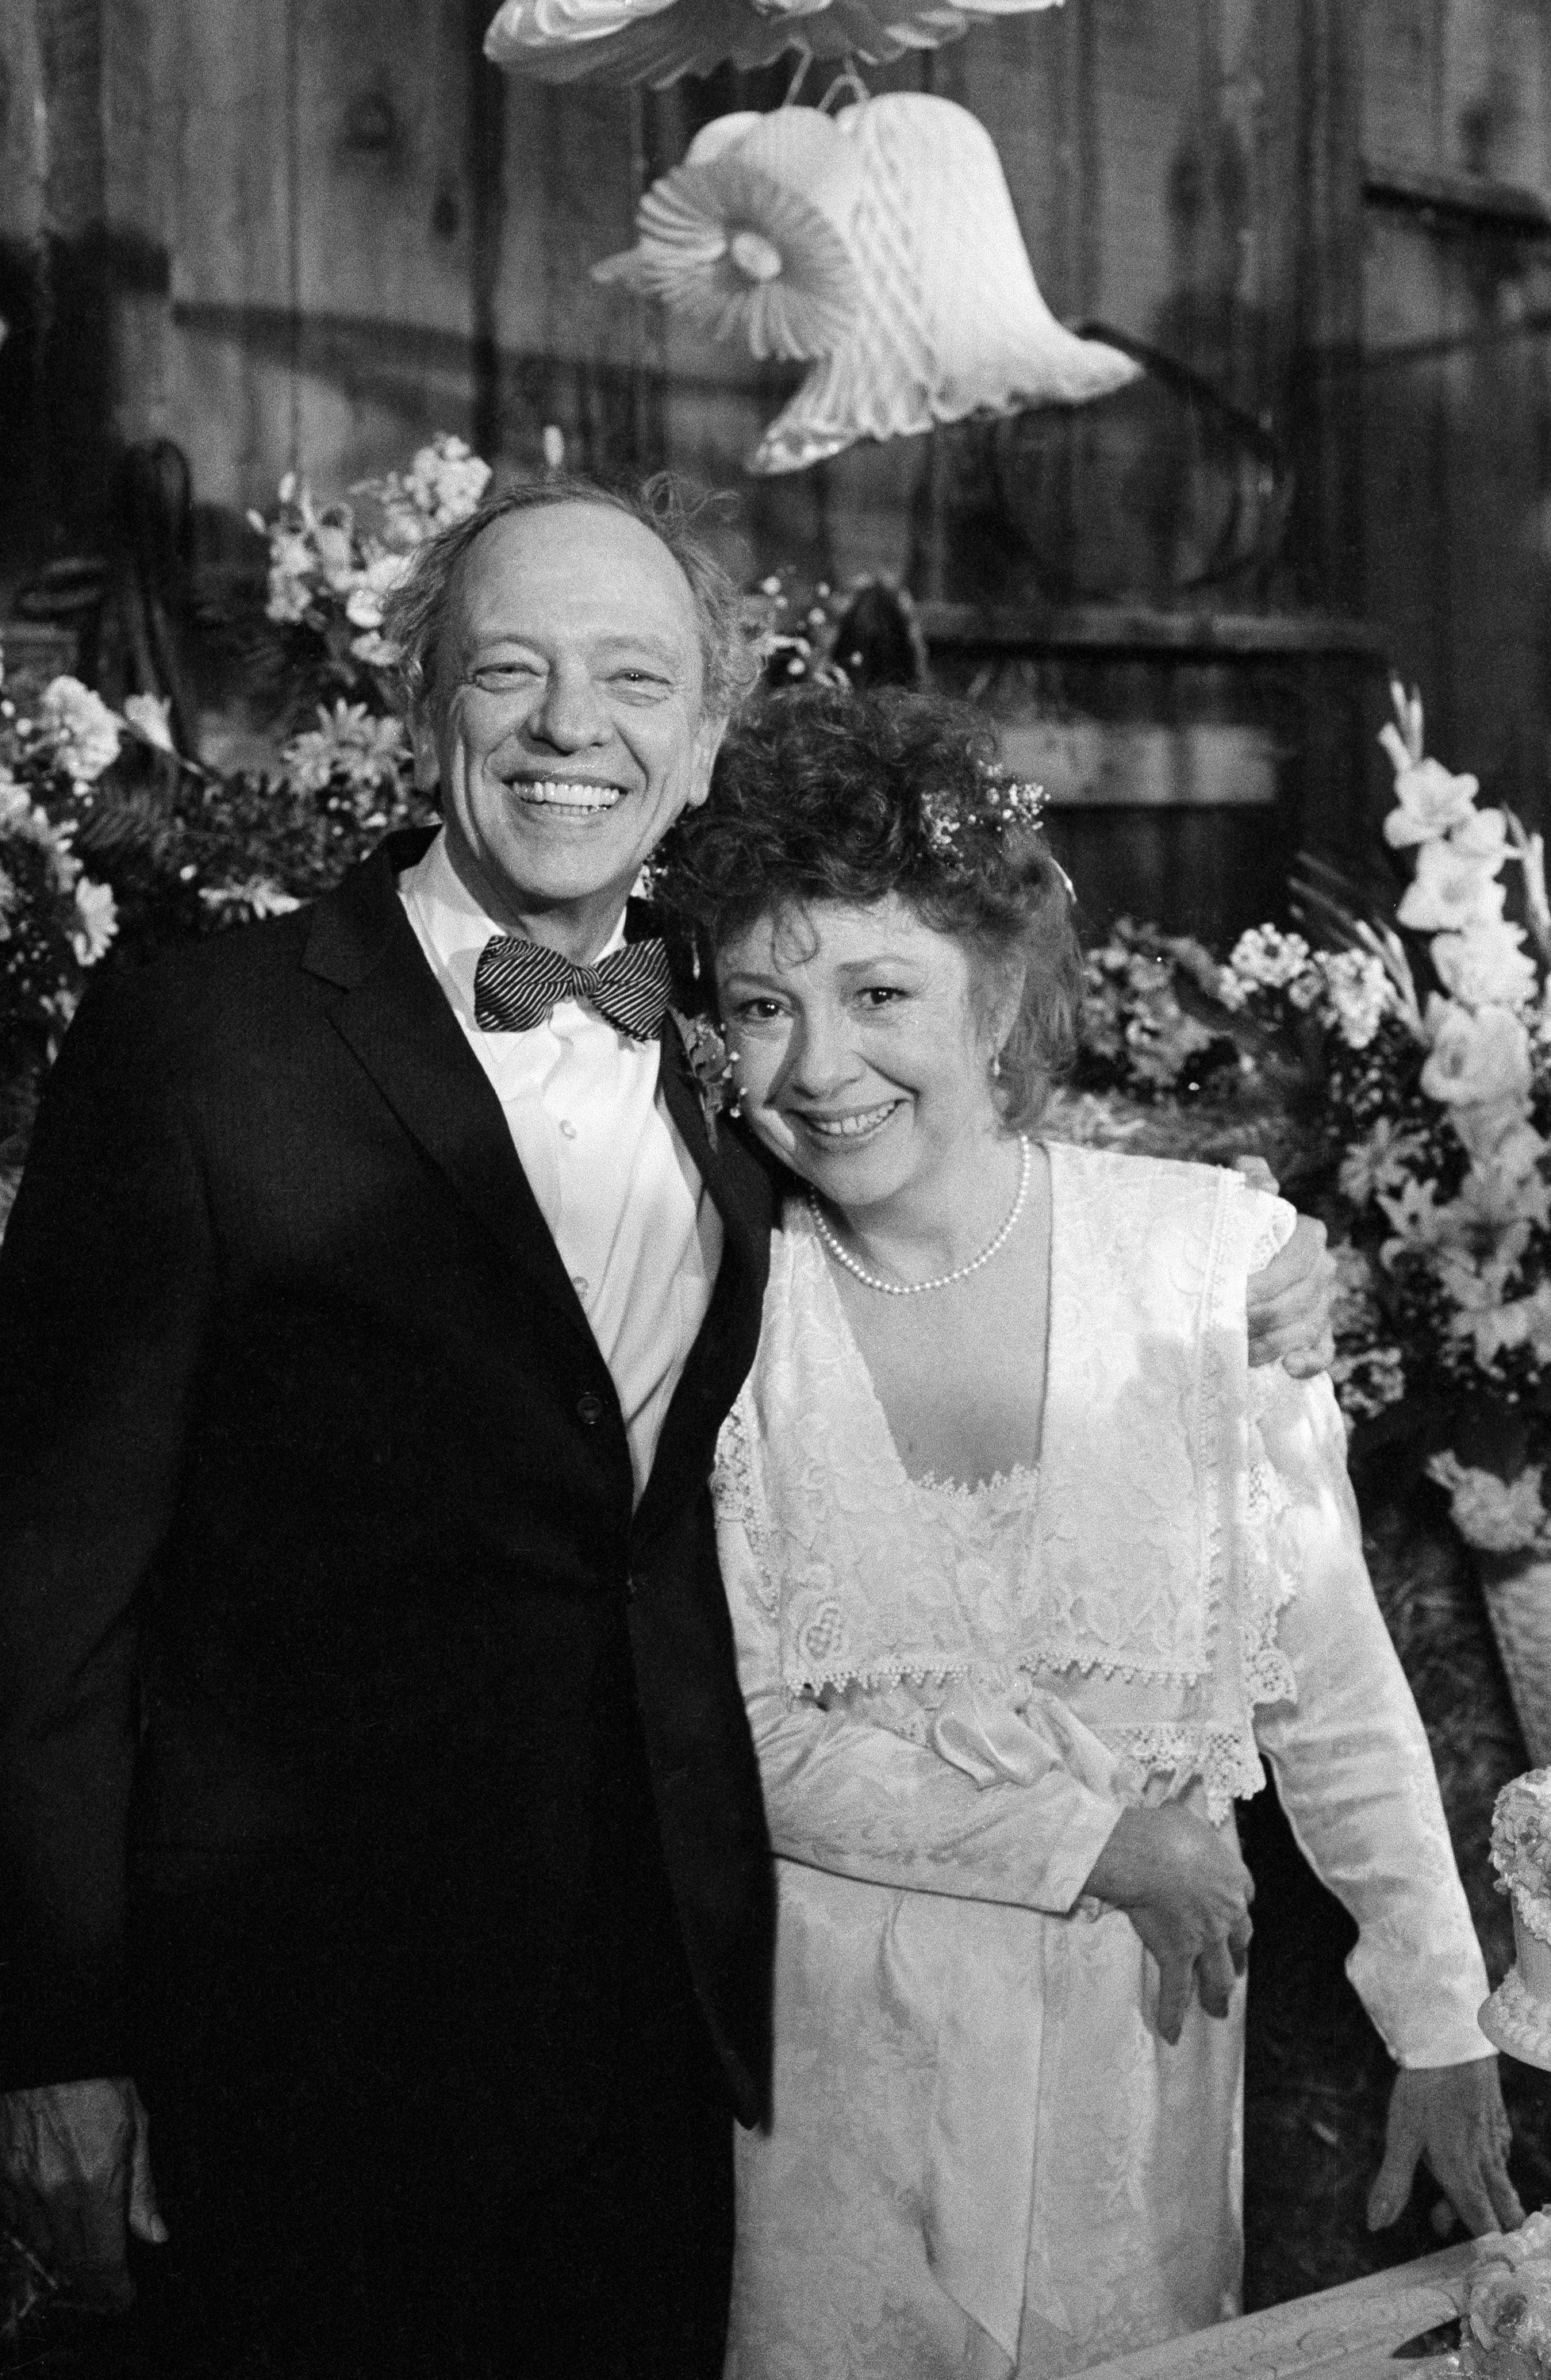 Actors Don Knotts and Betty Lynn reunited in the 1986 'Andy Griffith Show' reunion TV movie 'Return to Mayberry'